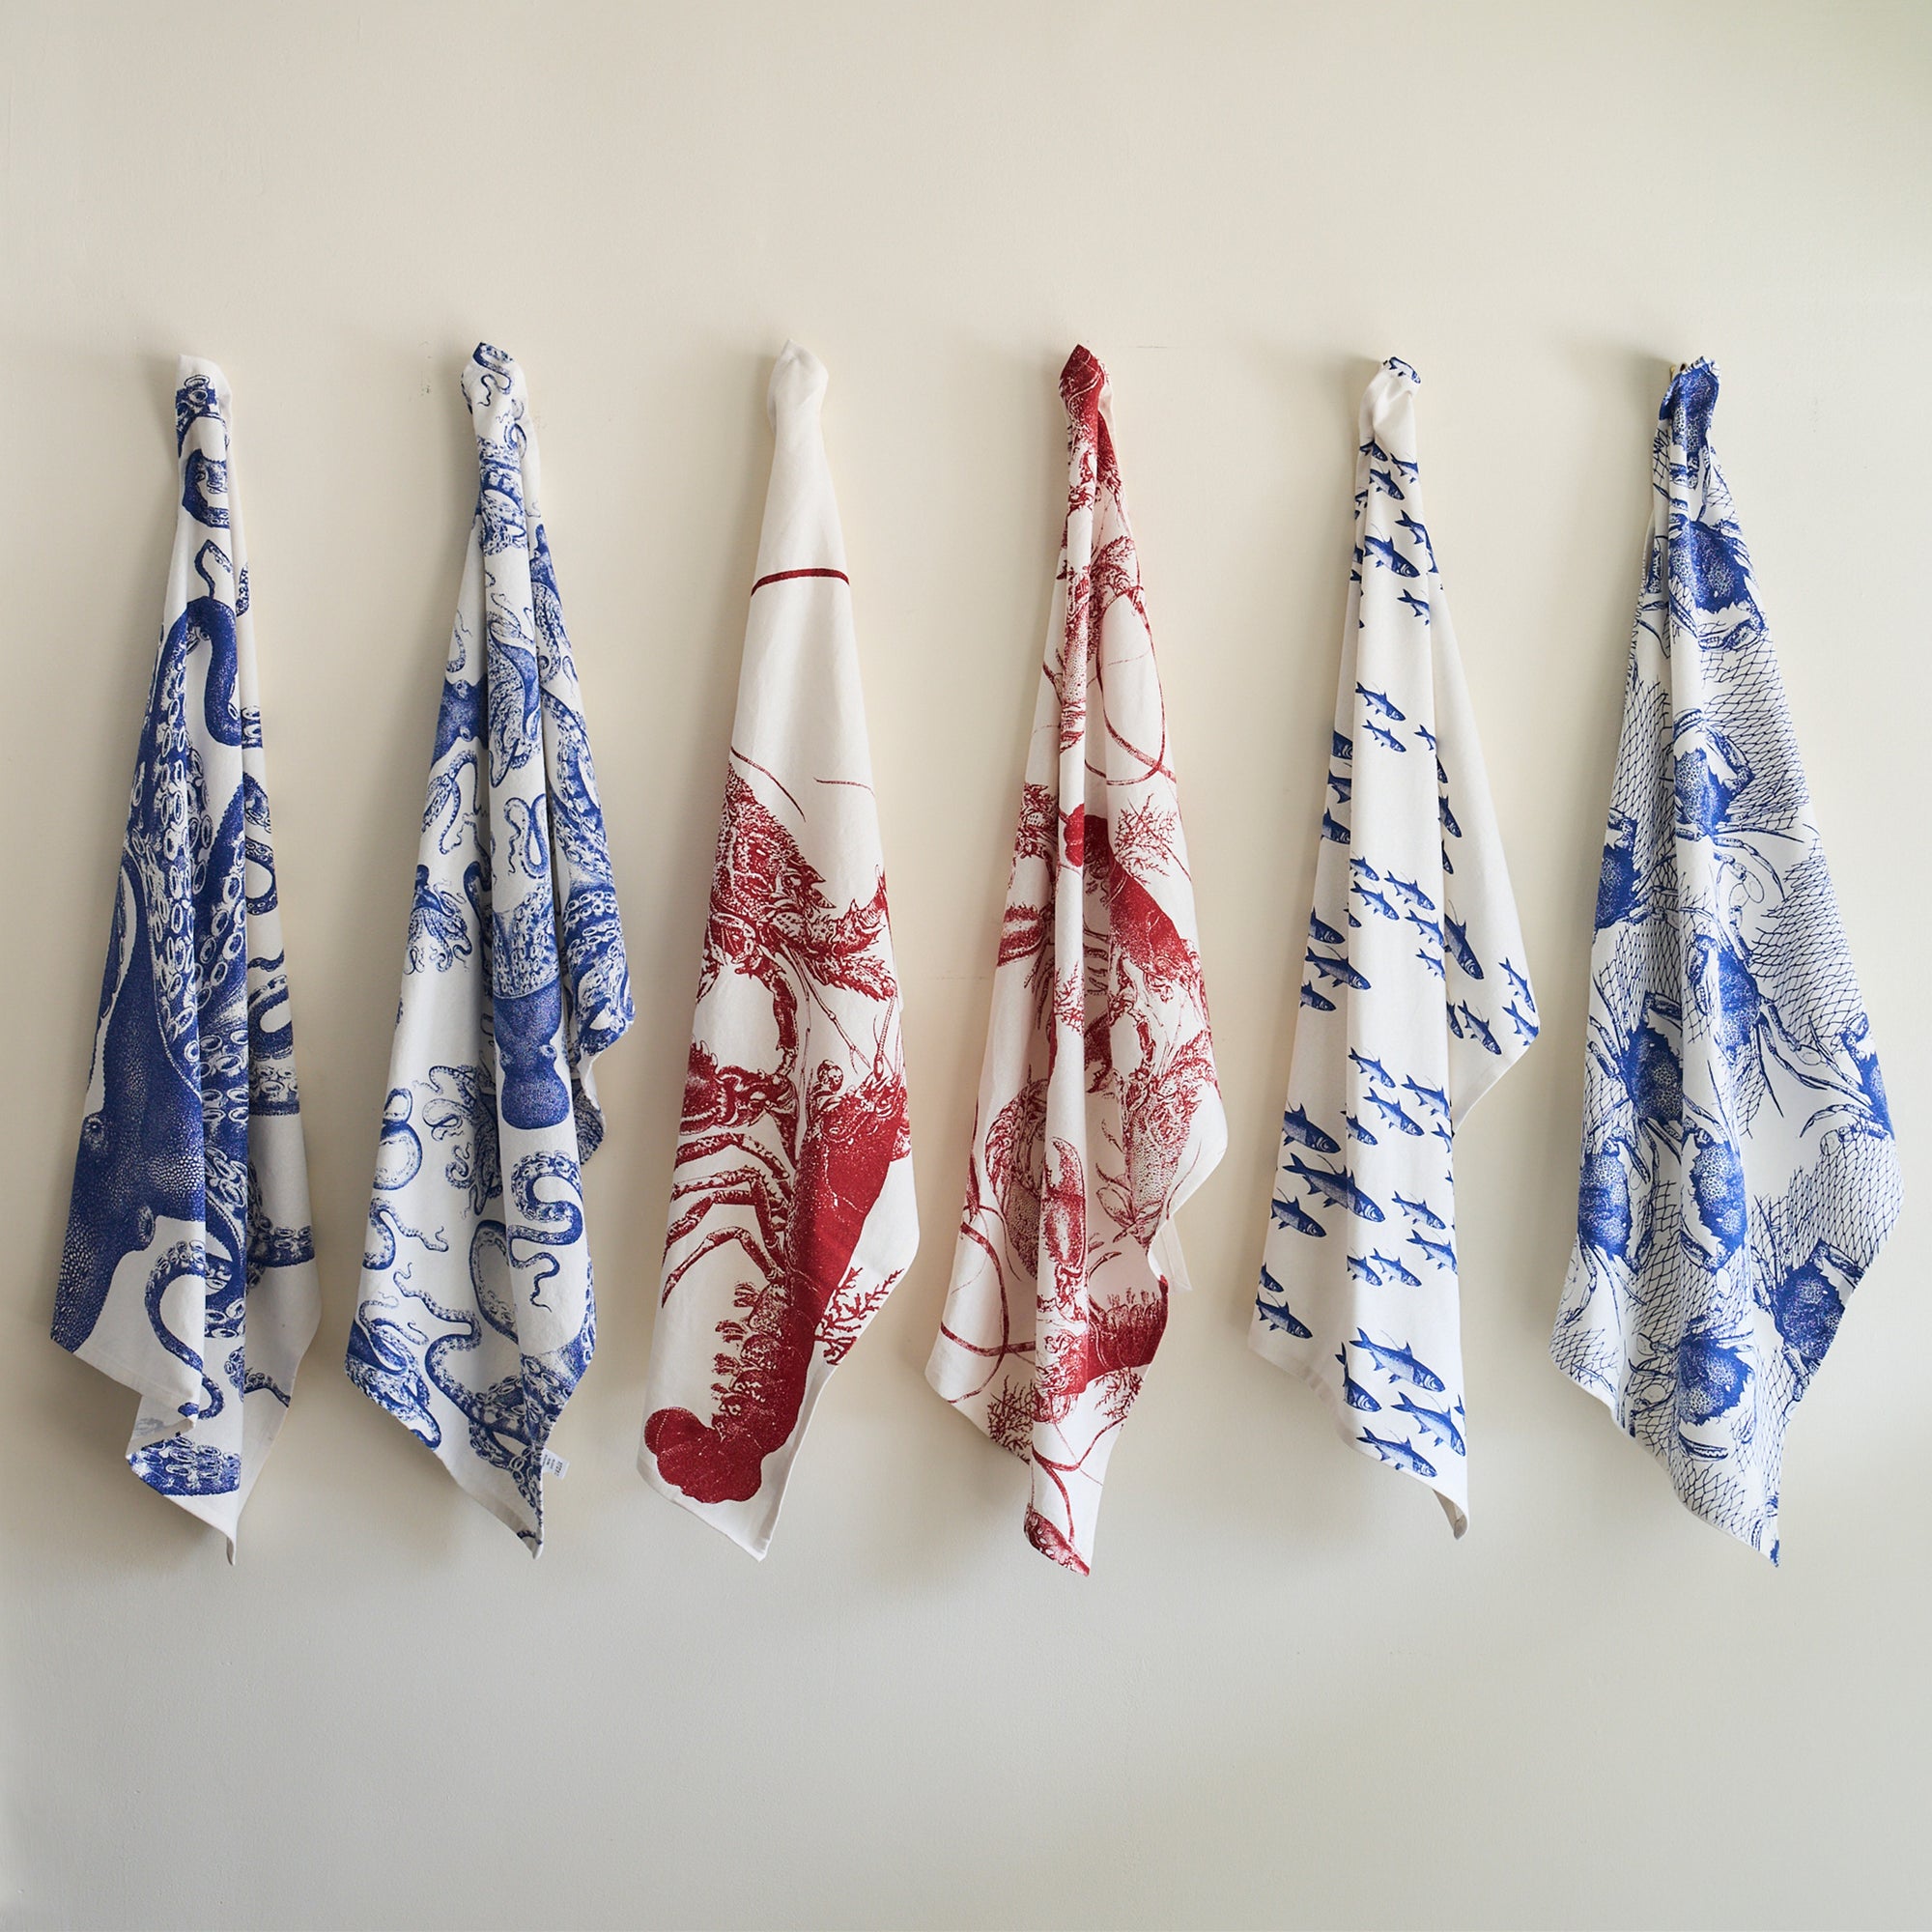 Coastal Kitchen Towel Collections in Blue and White and Red and White Cotton from Caskata